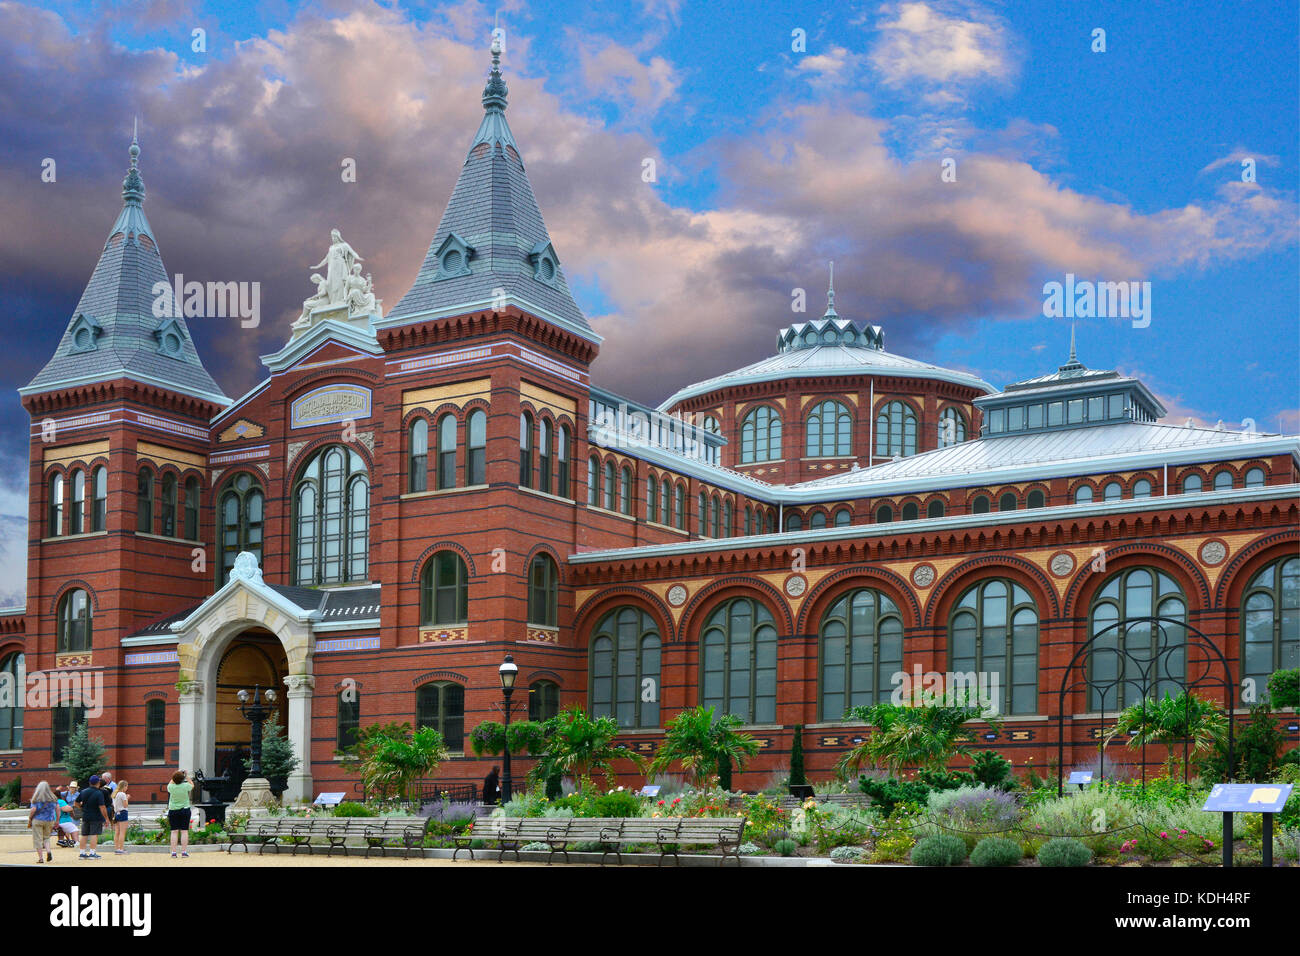 Tourists walk along the sidewalk of lovely landscaping and the historic red brick Smithsonian's Arts and Industries Building in Washington, DC, USA Stock Photo